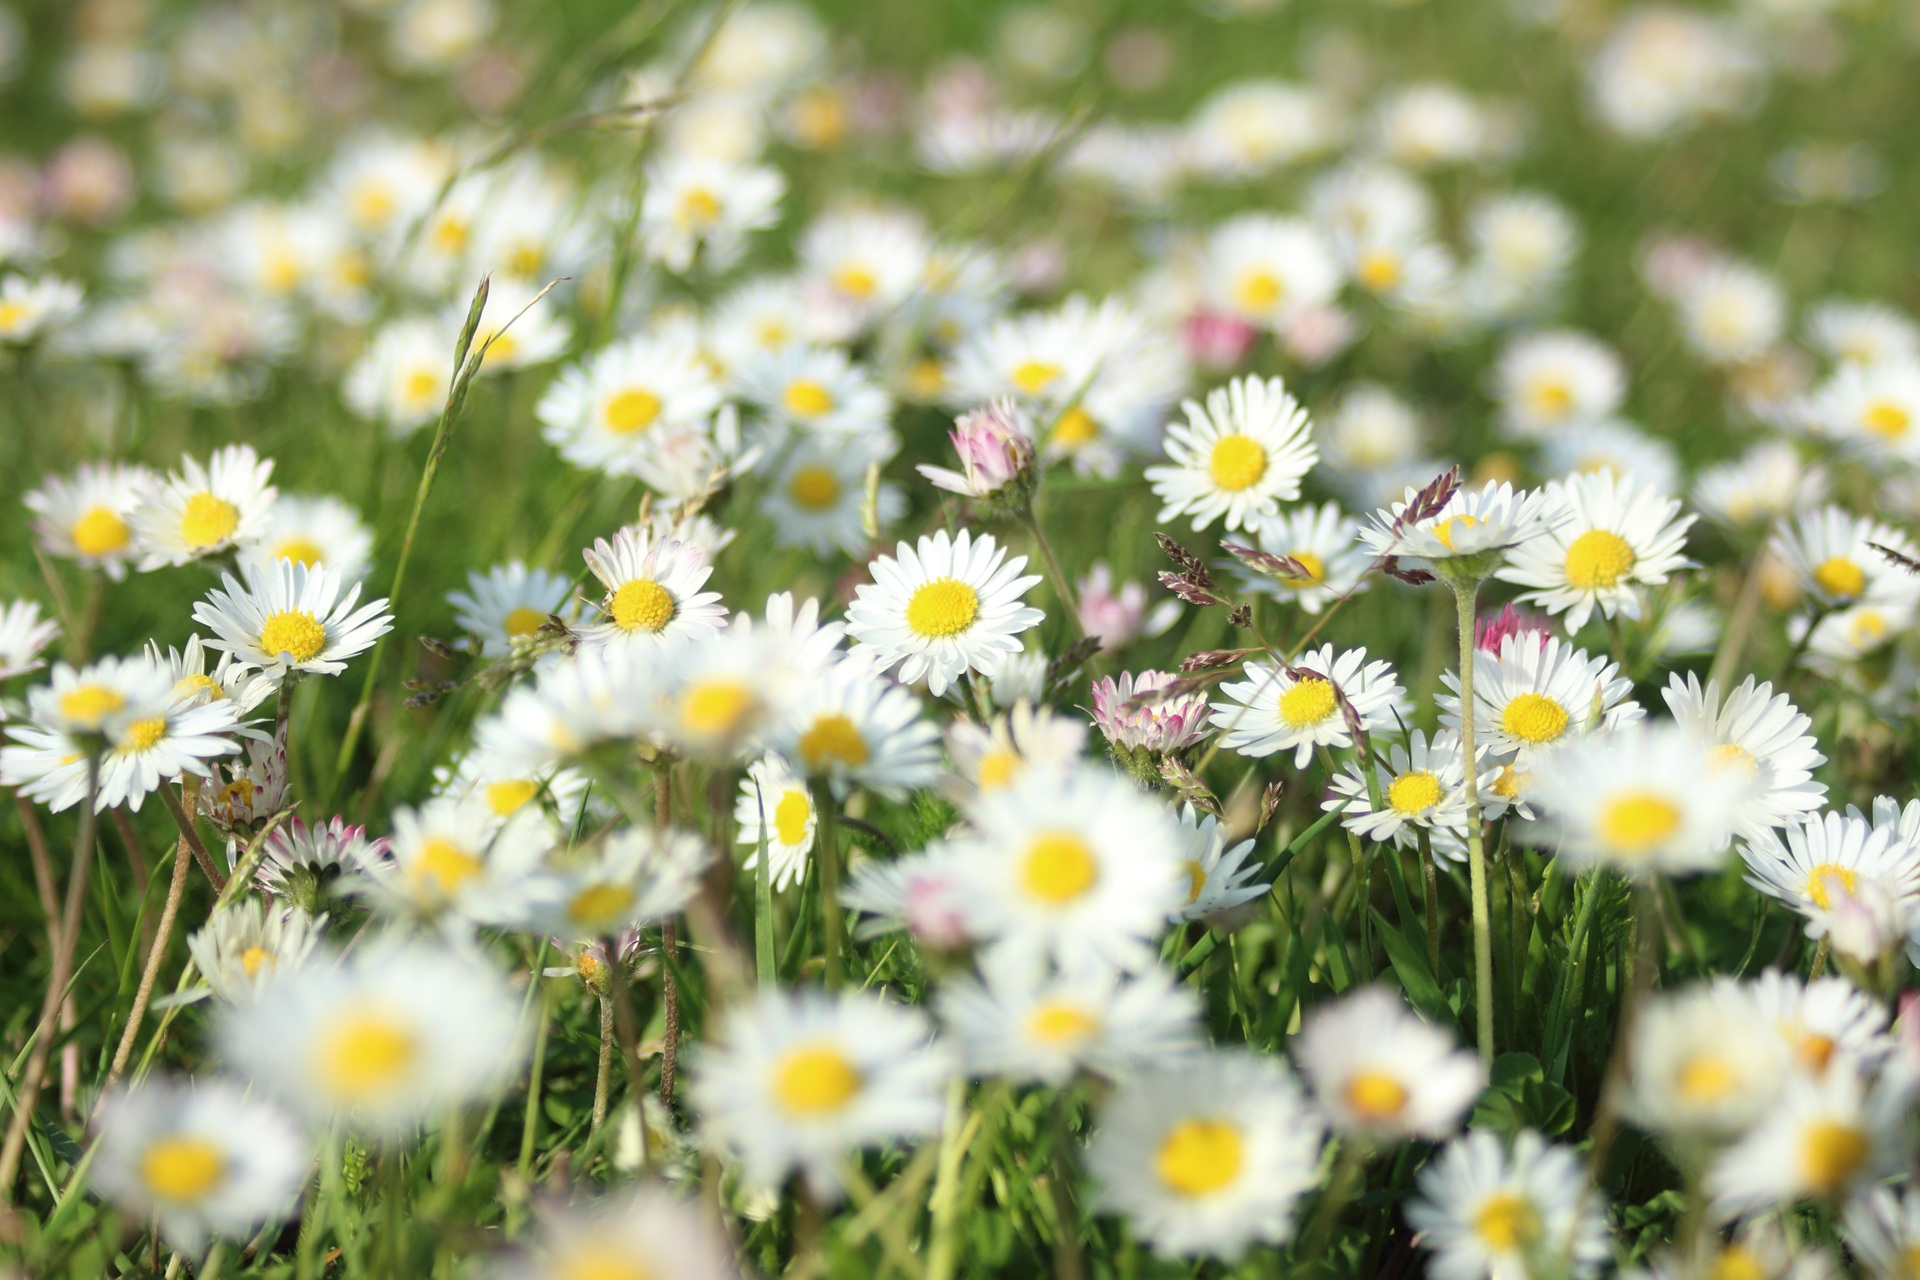 Many white daisies on a green lawn free image download